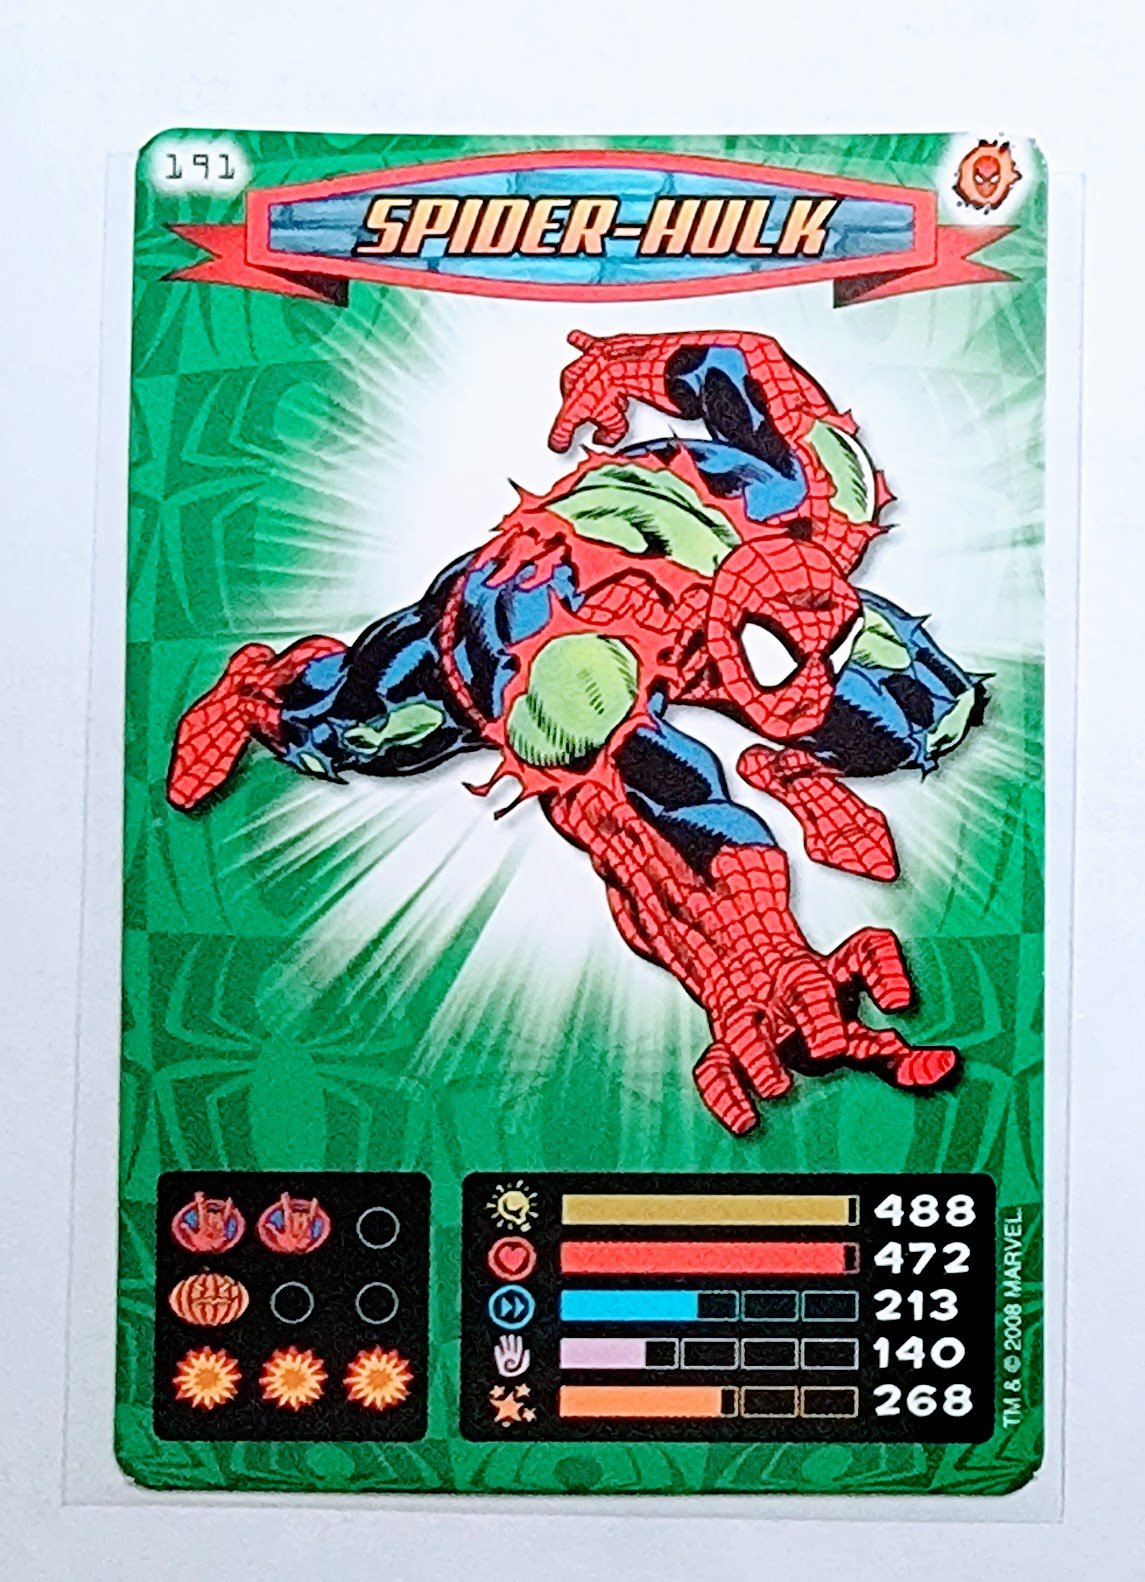 2008 Spiderman Heroes and Villains Spider-Hulk #191 Marvel Booster Trading Card UPTI simple Xclusive Collectibles   